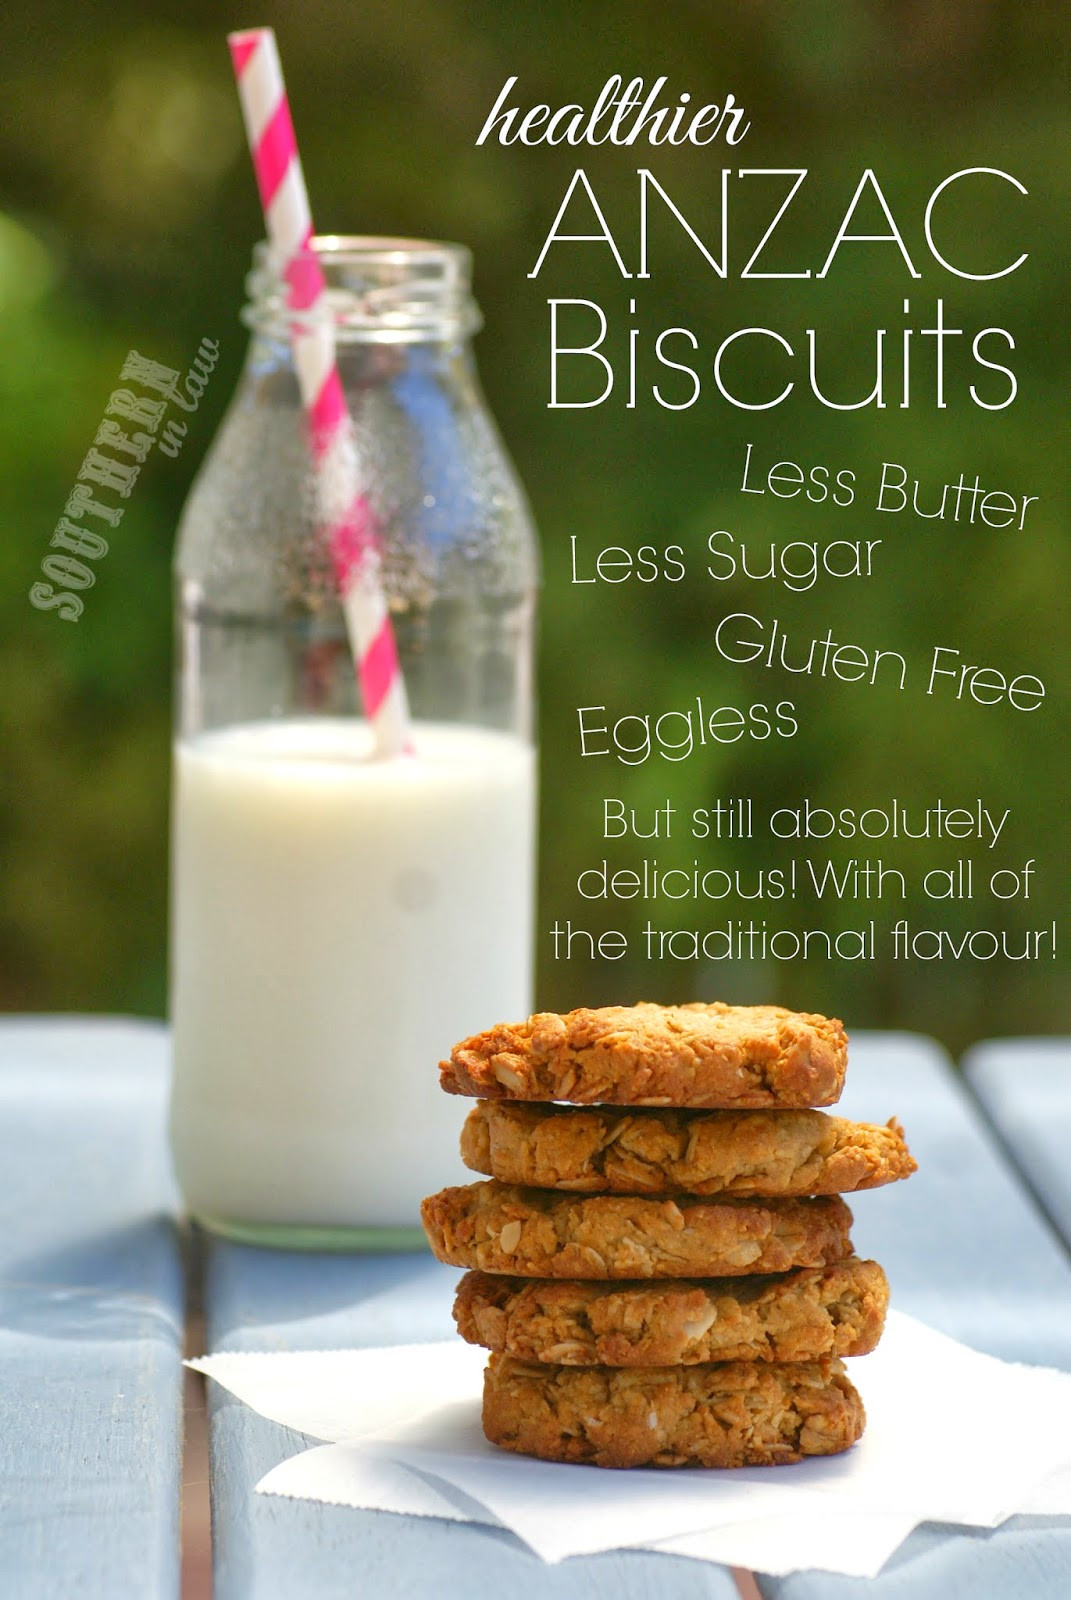 Low Fat Biscuit Recipe
 Southern In Law Recipe Healthier ANZAC Biscuits